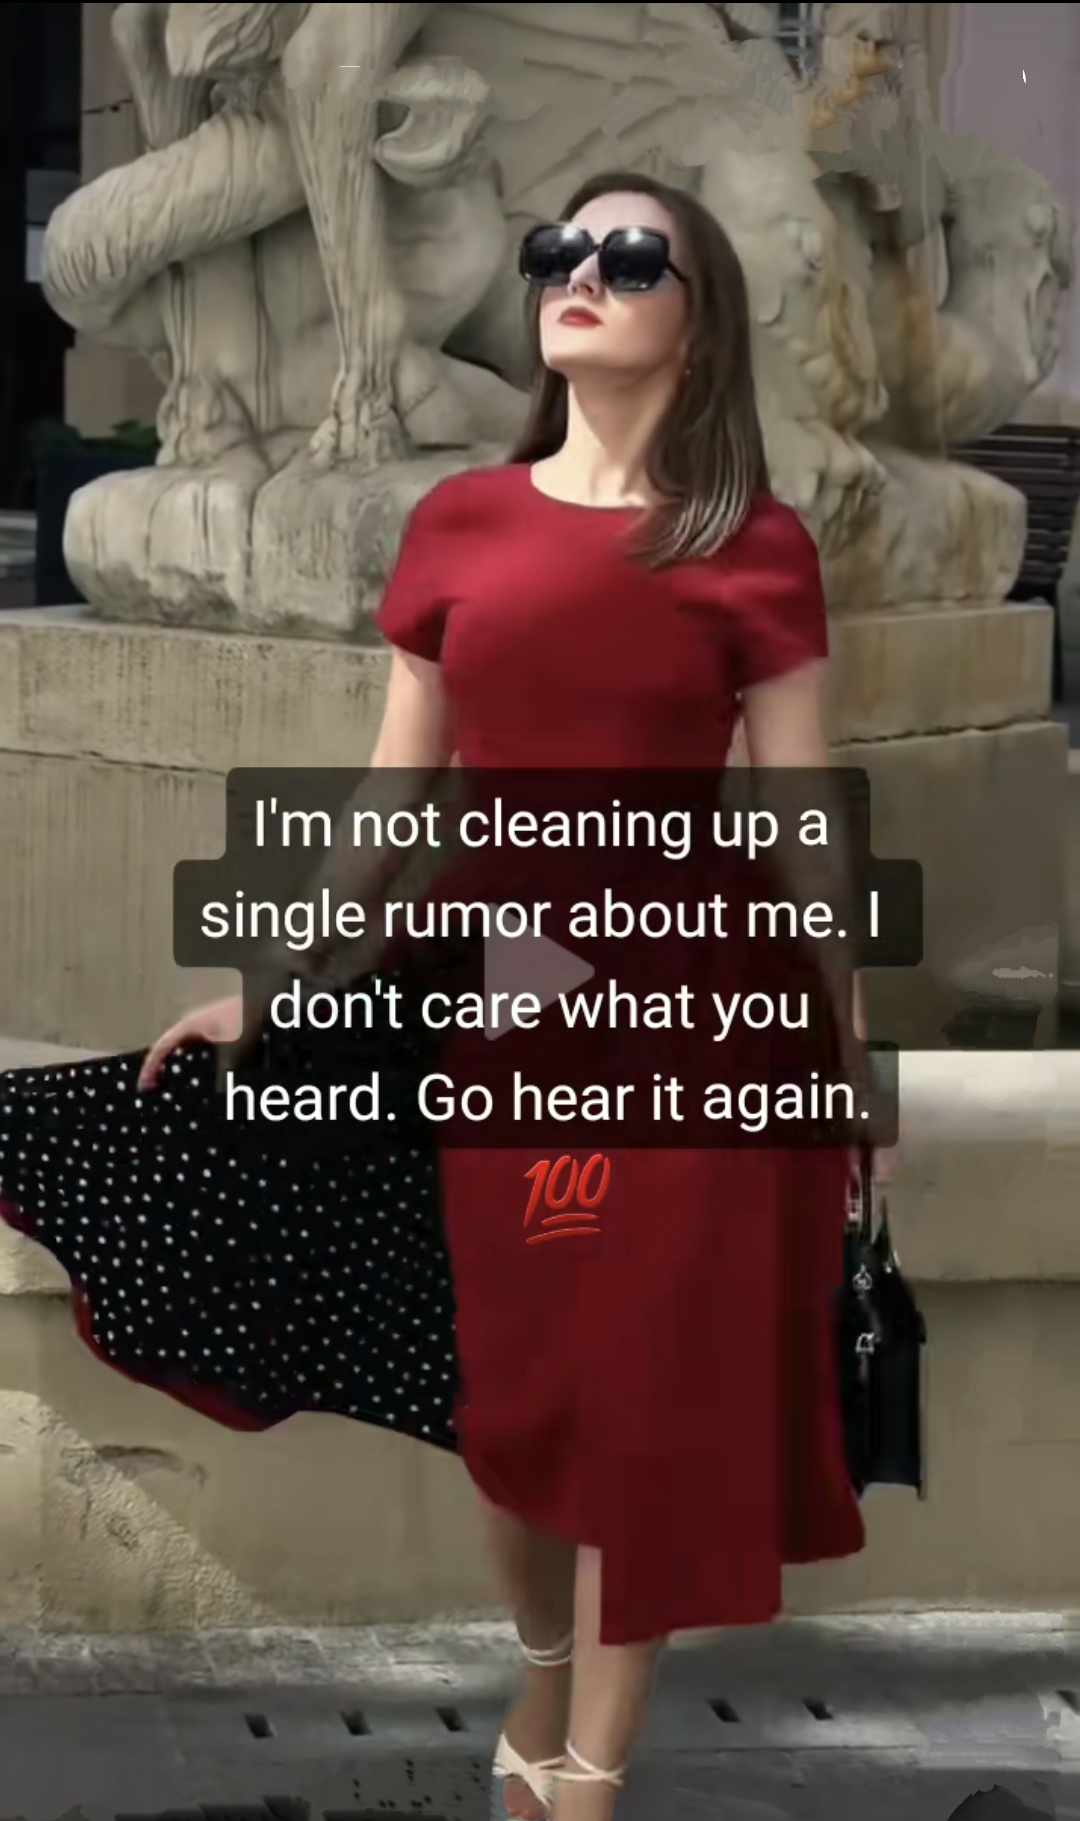 woman in red dress, comment about ignoring rumors